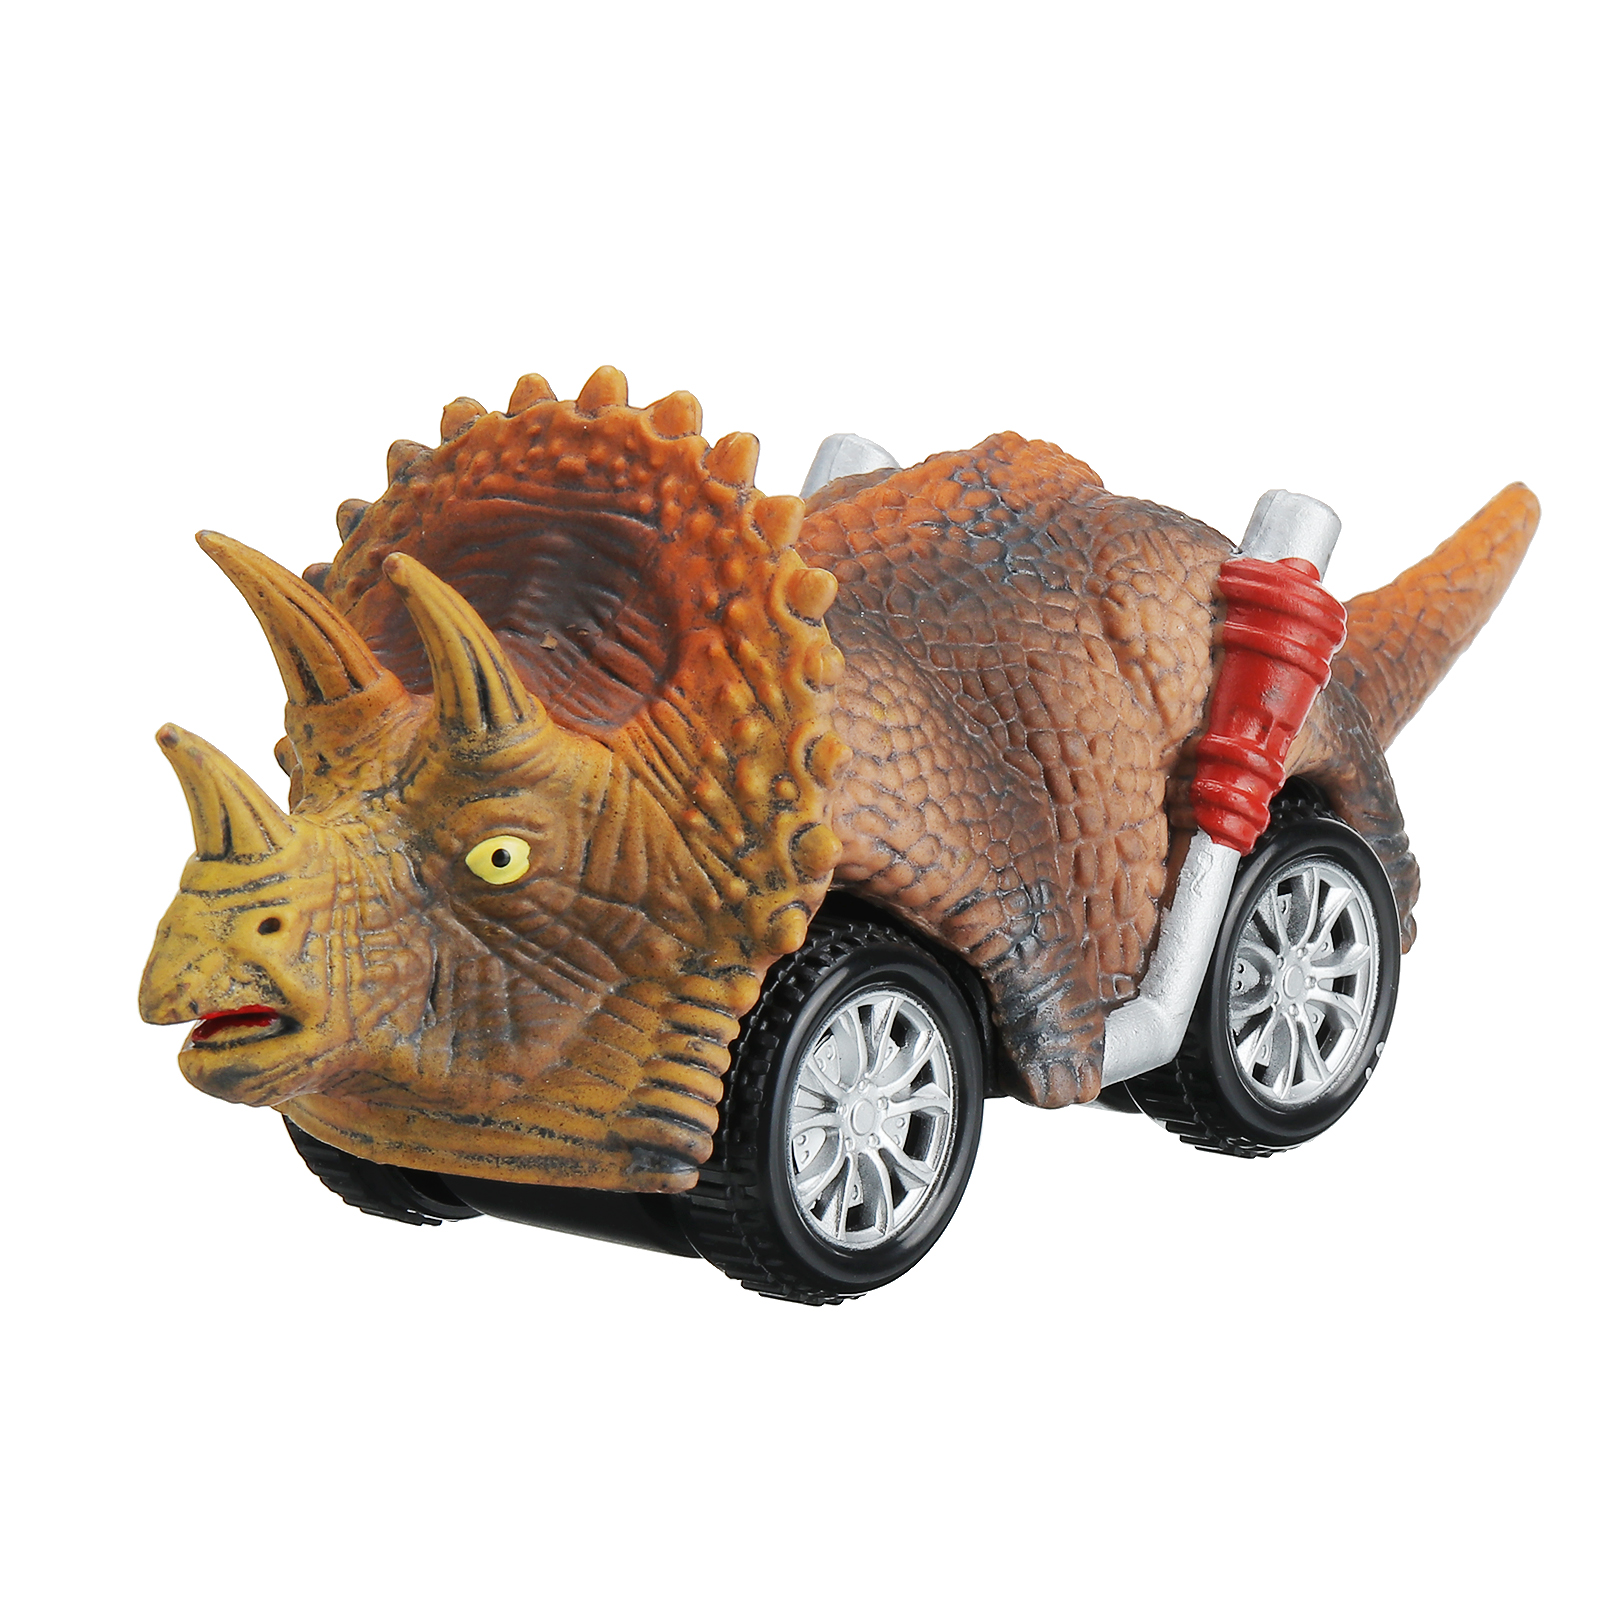 Pickwoo-Dinosaur-Toys-Cars-Inertia-Vehicles-Toddlers-Kids-Dinosaur-Party-Games-with-T-Rex-Dino-Toys--1895631-9